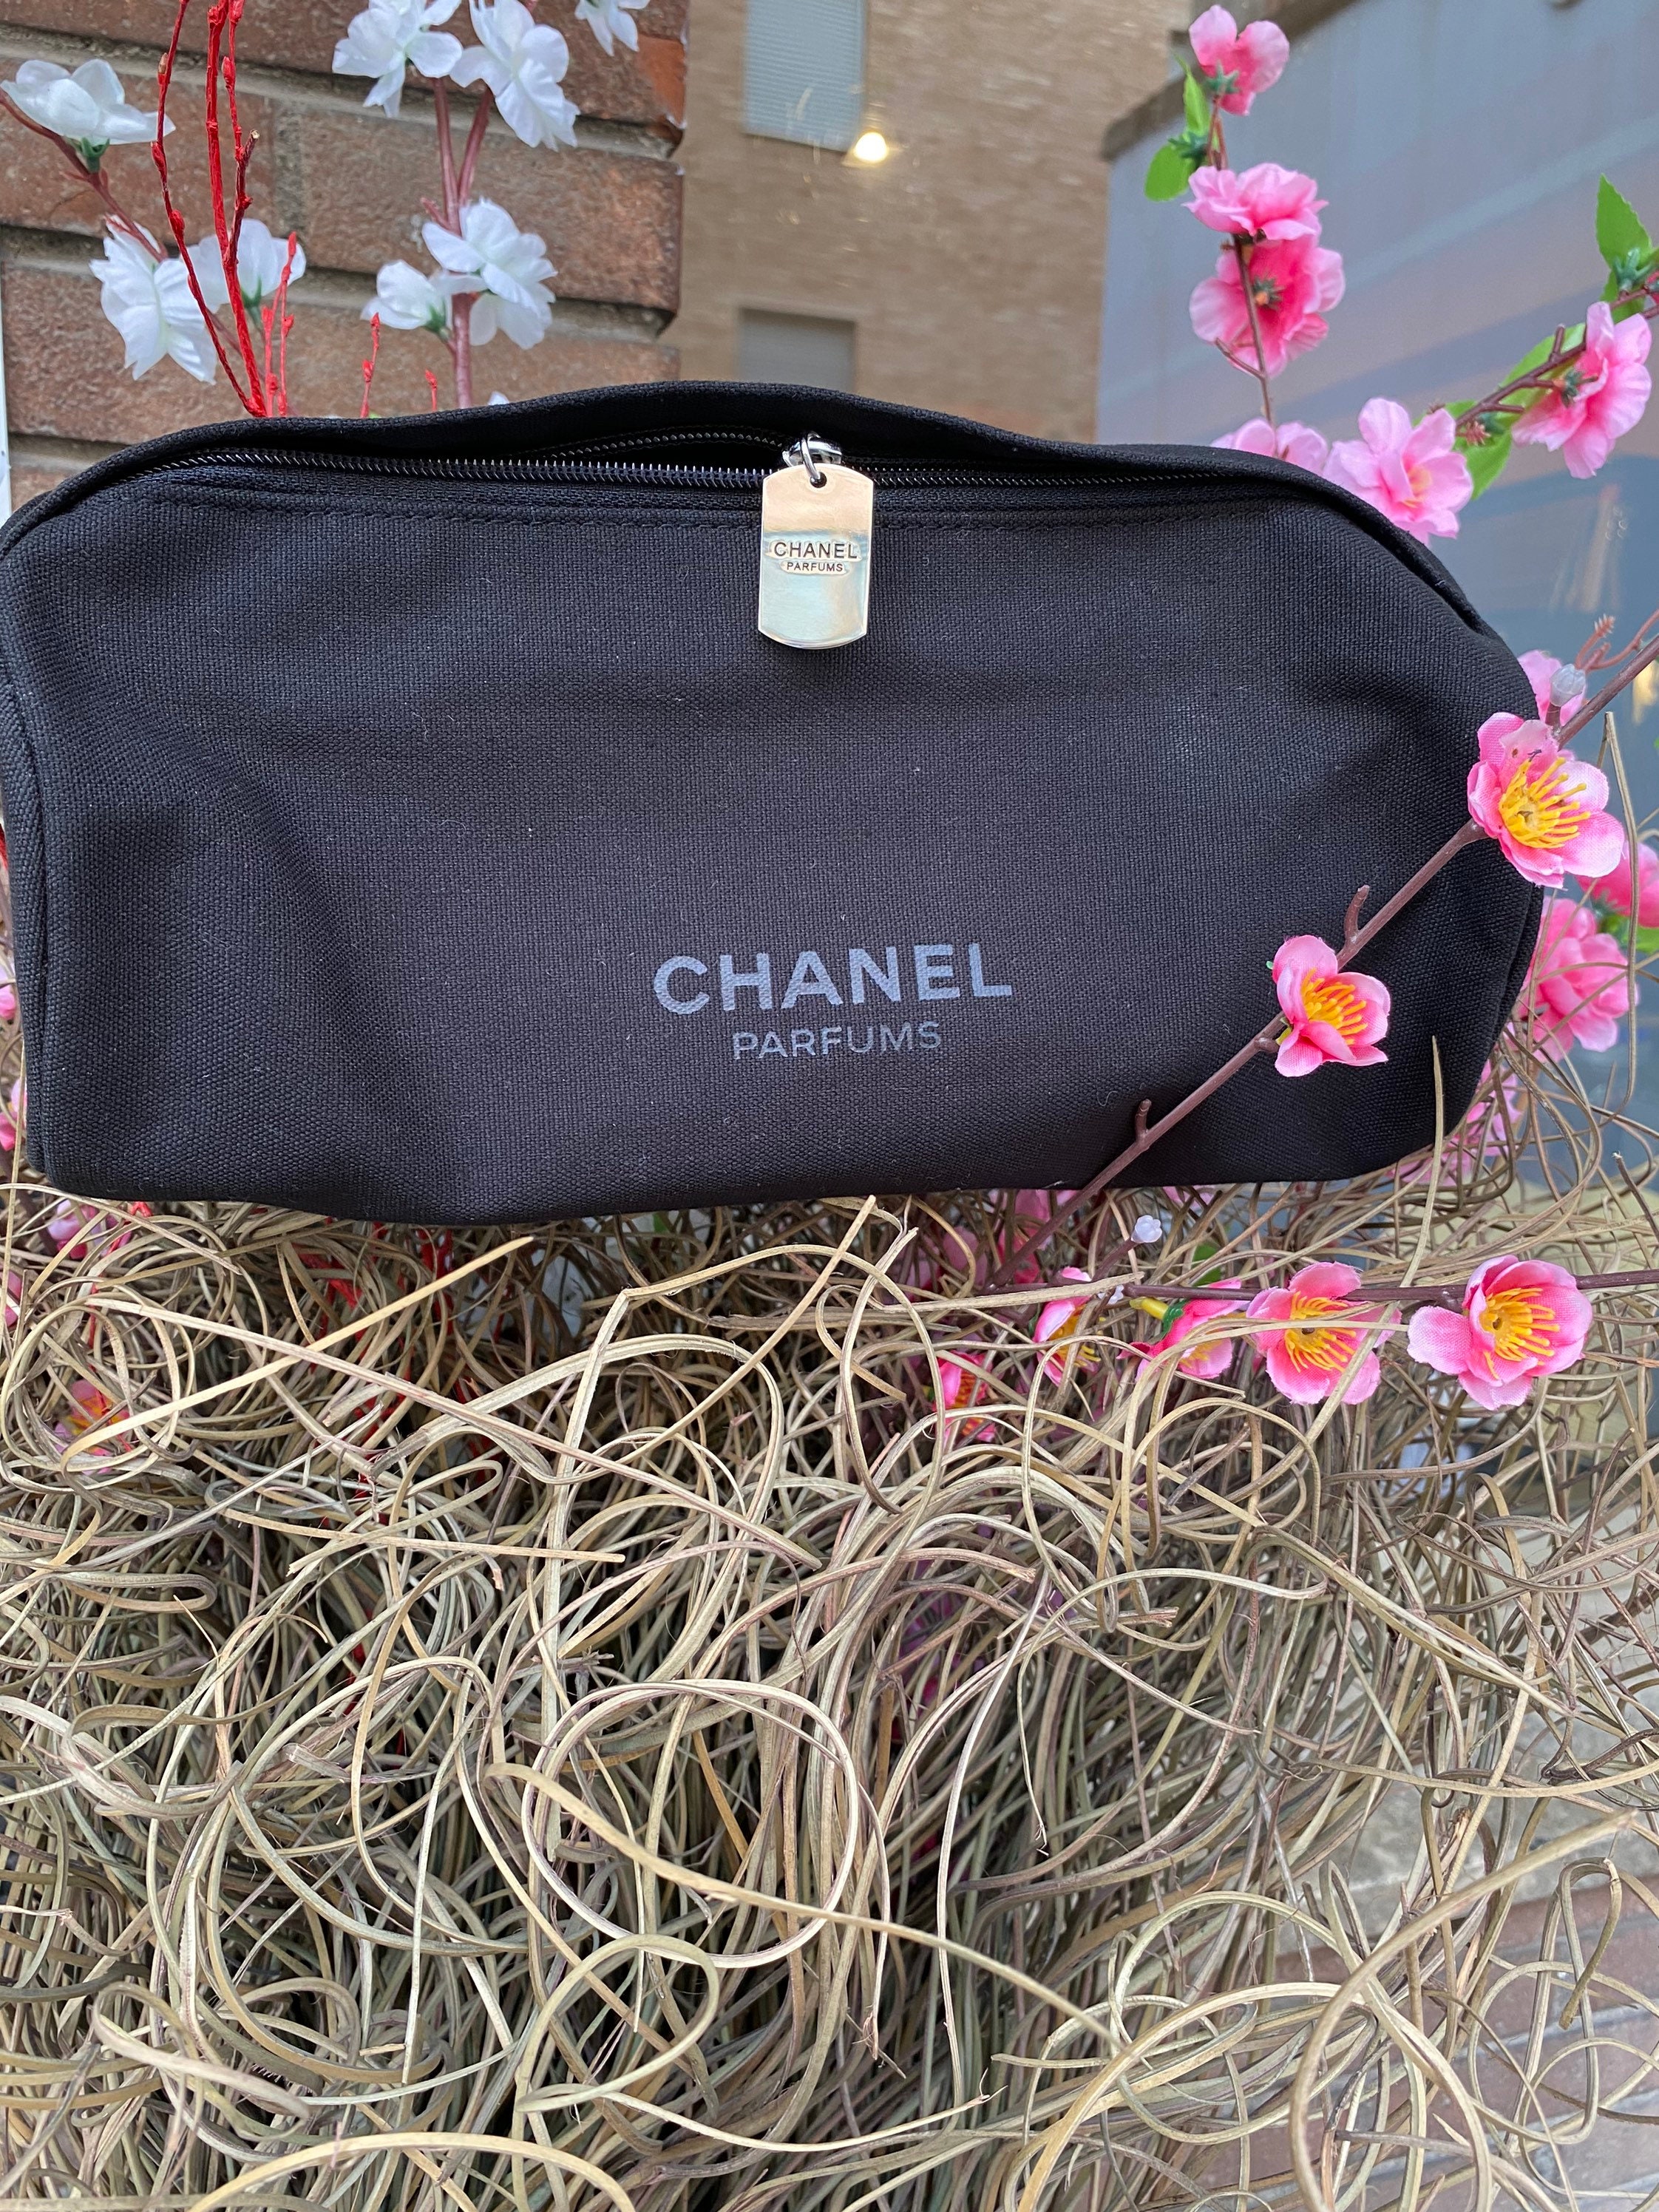 chanel parfums cosmetic bag